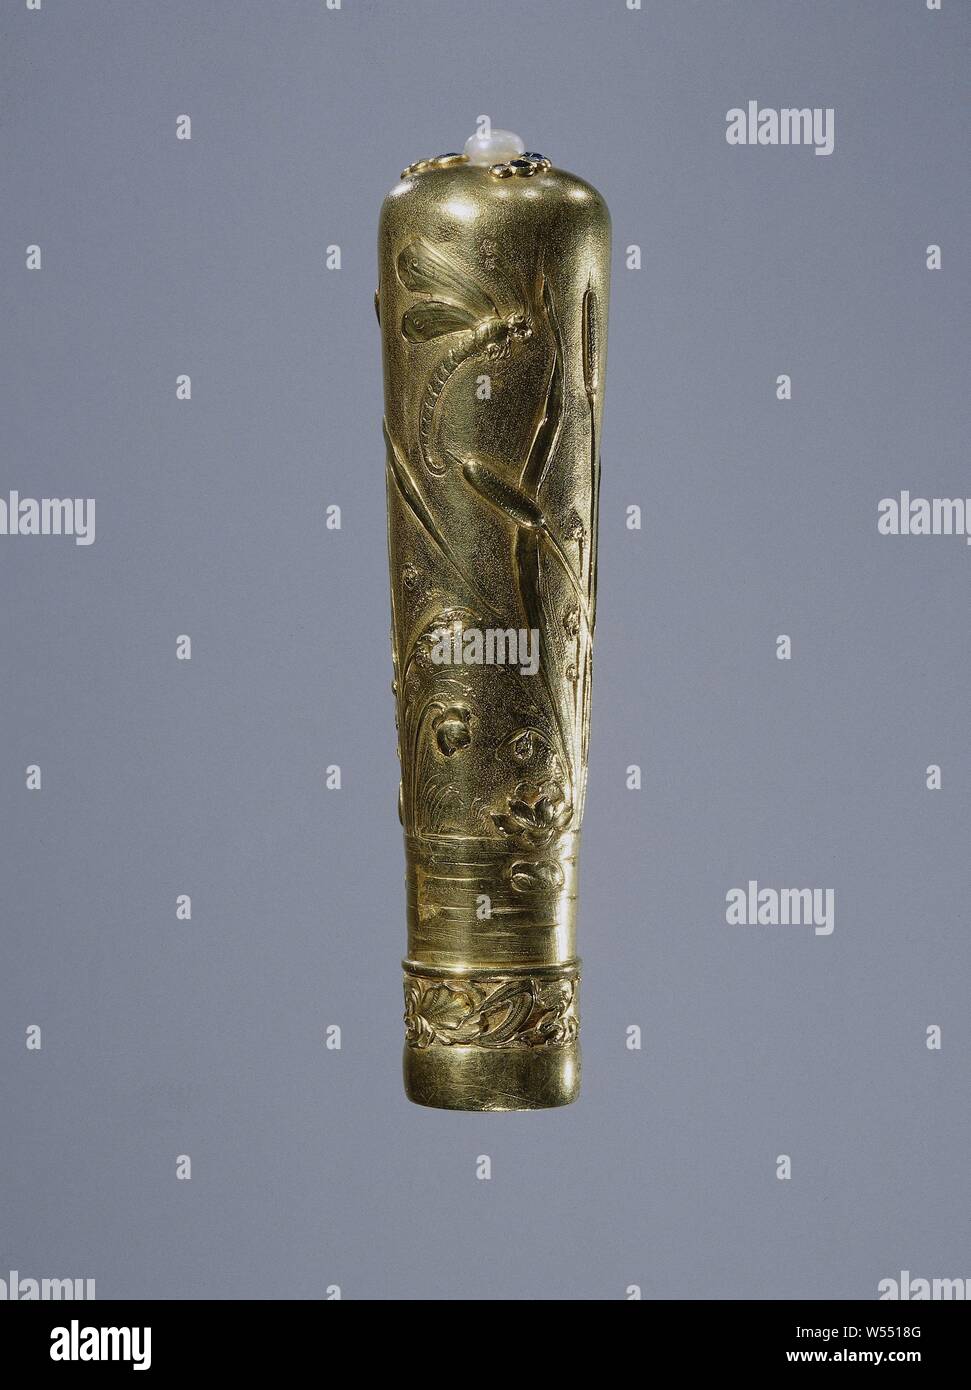 Parasol bud of gold, decorated with water lilies, cattail and dragonfly, Parasol bud of gold. The button is oval from below and extends to the round, slightly convex top. It rests on a slightly curved, smooth belt, above which is driven a frieze of a repeating pattern of lily-like flowers against a roughened background. The upper side is decorated with a pearl, from which three C-shaped garlands run, each of which consists of four decreasing golden settings with alternating sapphires and diamonds. The bud is driven all around with water and various plants such as water lilies, cattail and reed Stock Photo